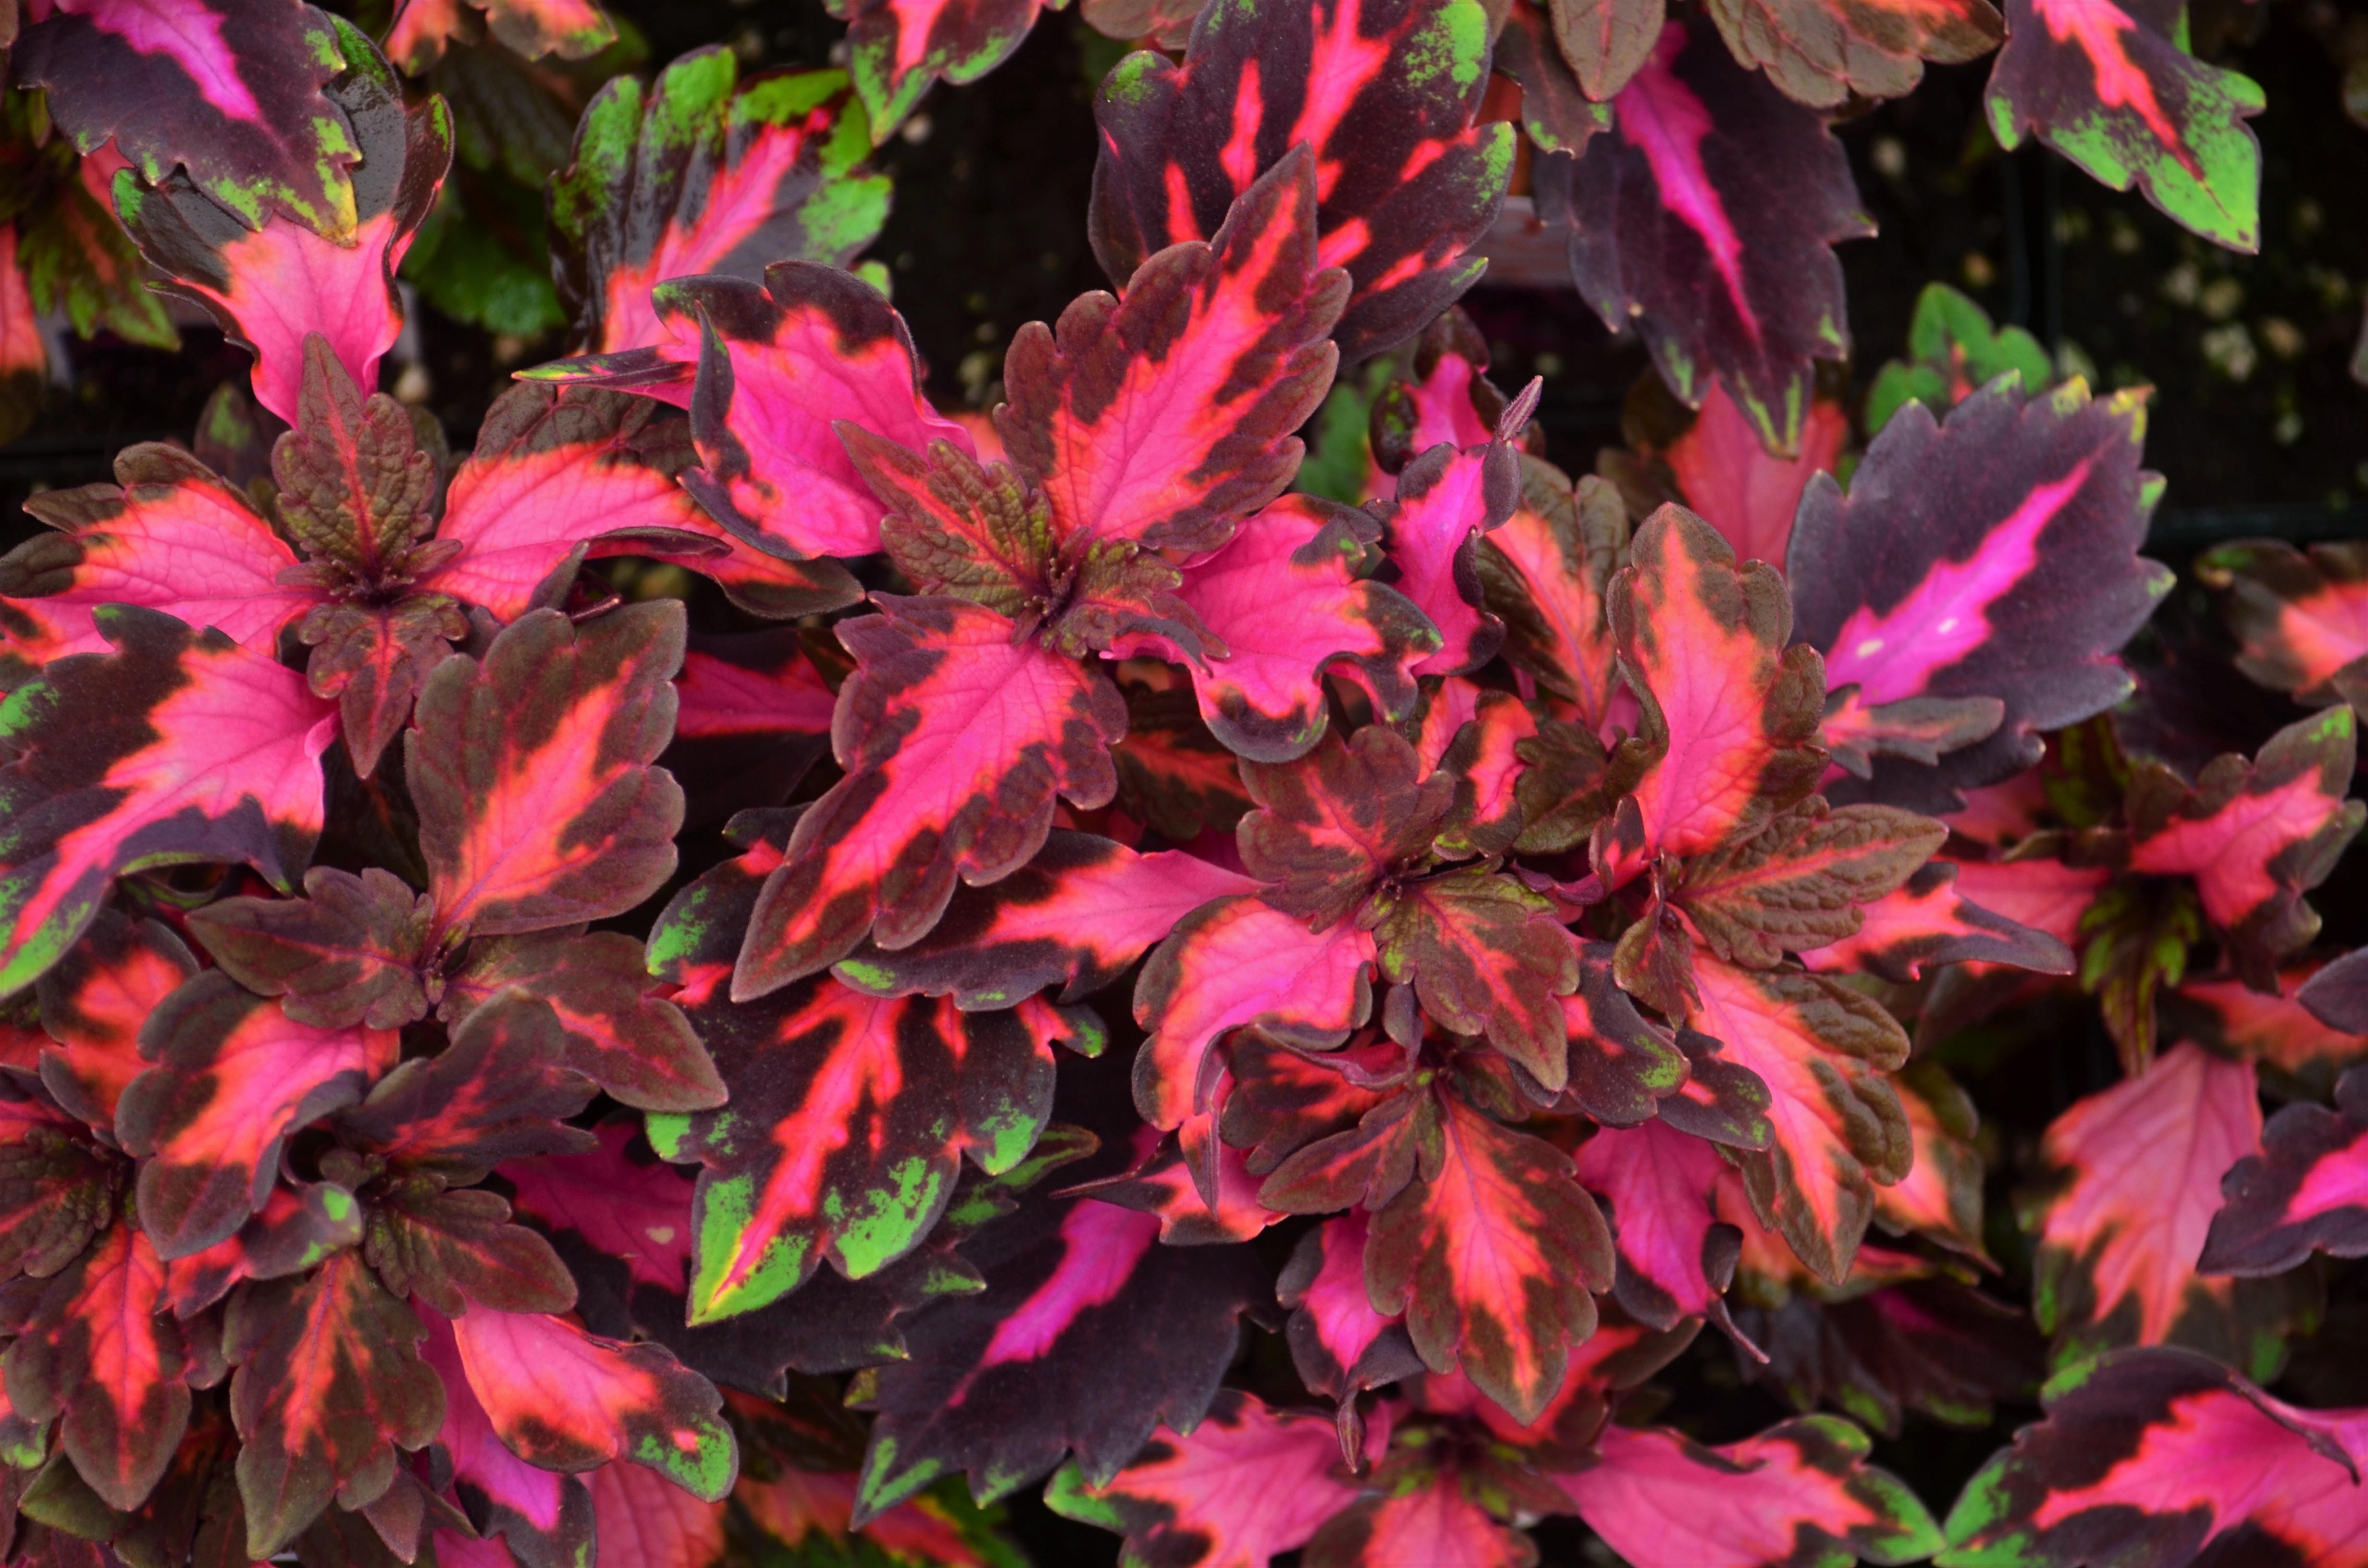 Solenostemon scuttelarioides Stained Glassworks 'Royalty' - Coleus Royalty from Hillcrest Nursery